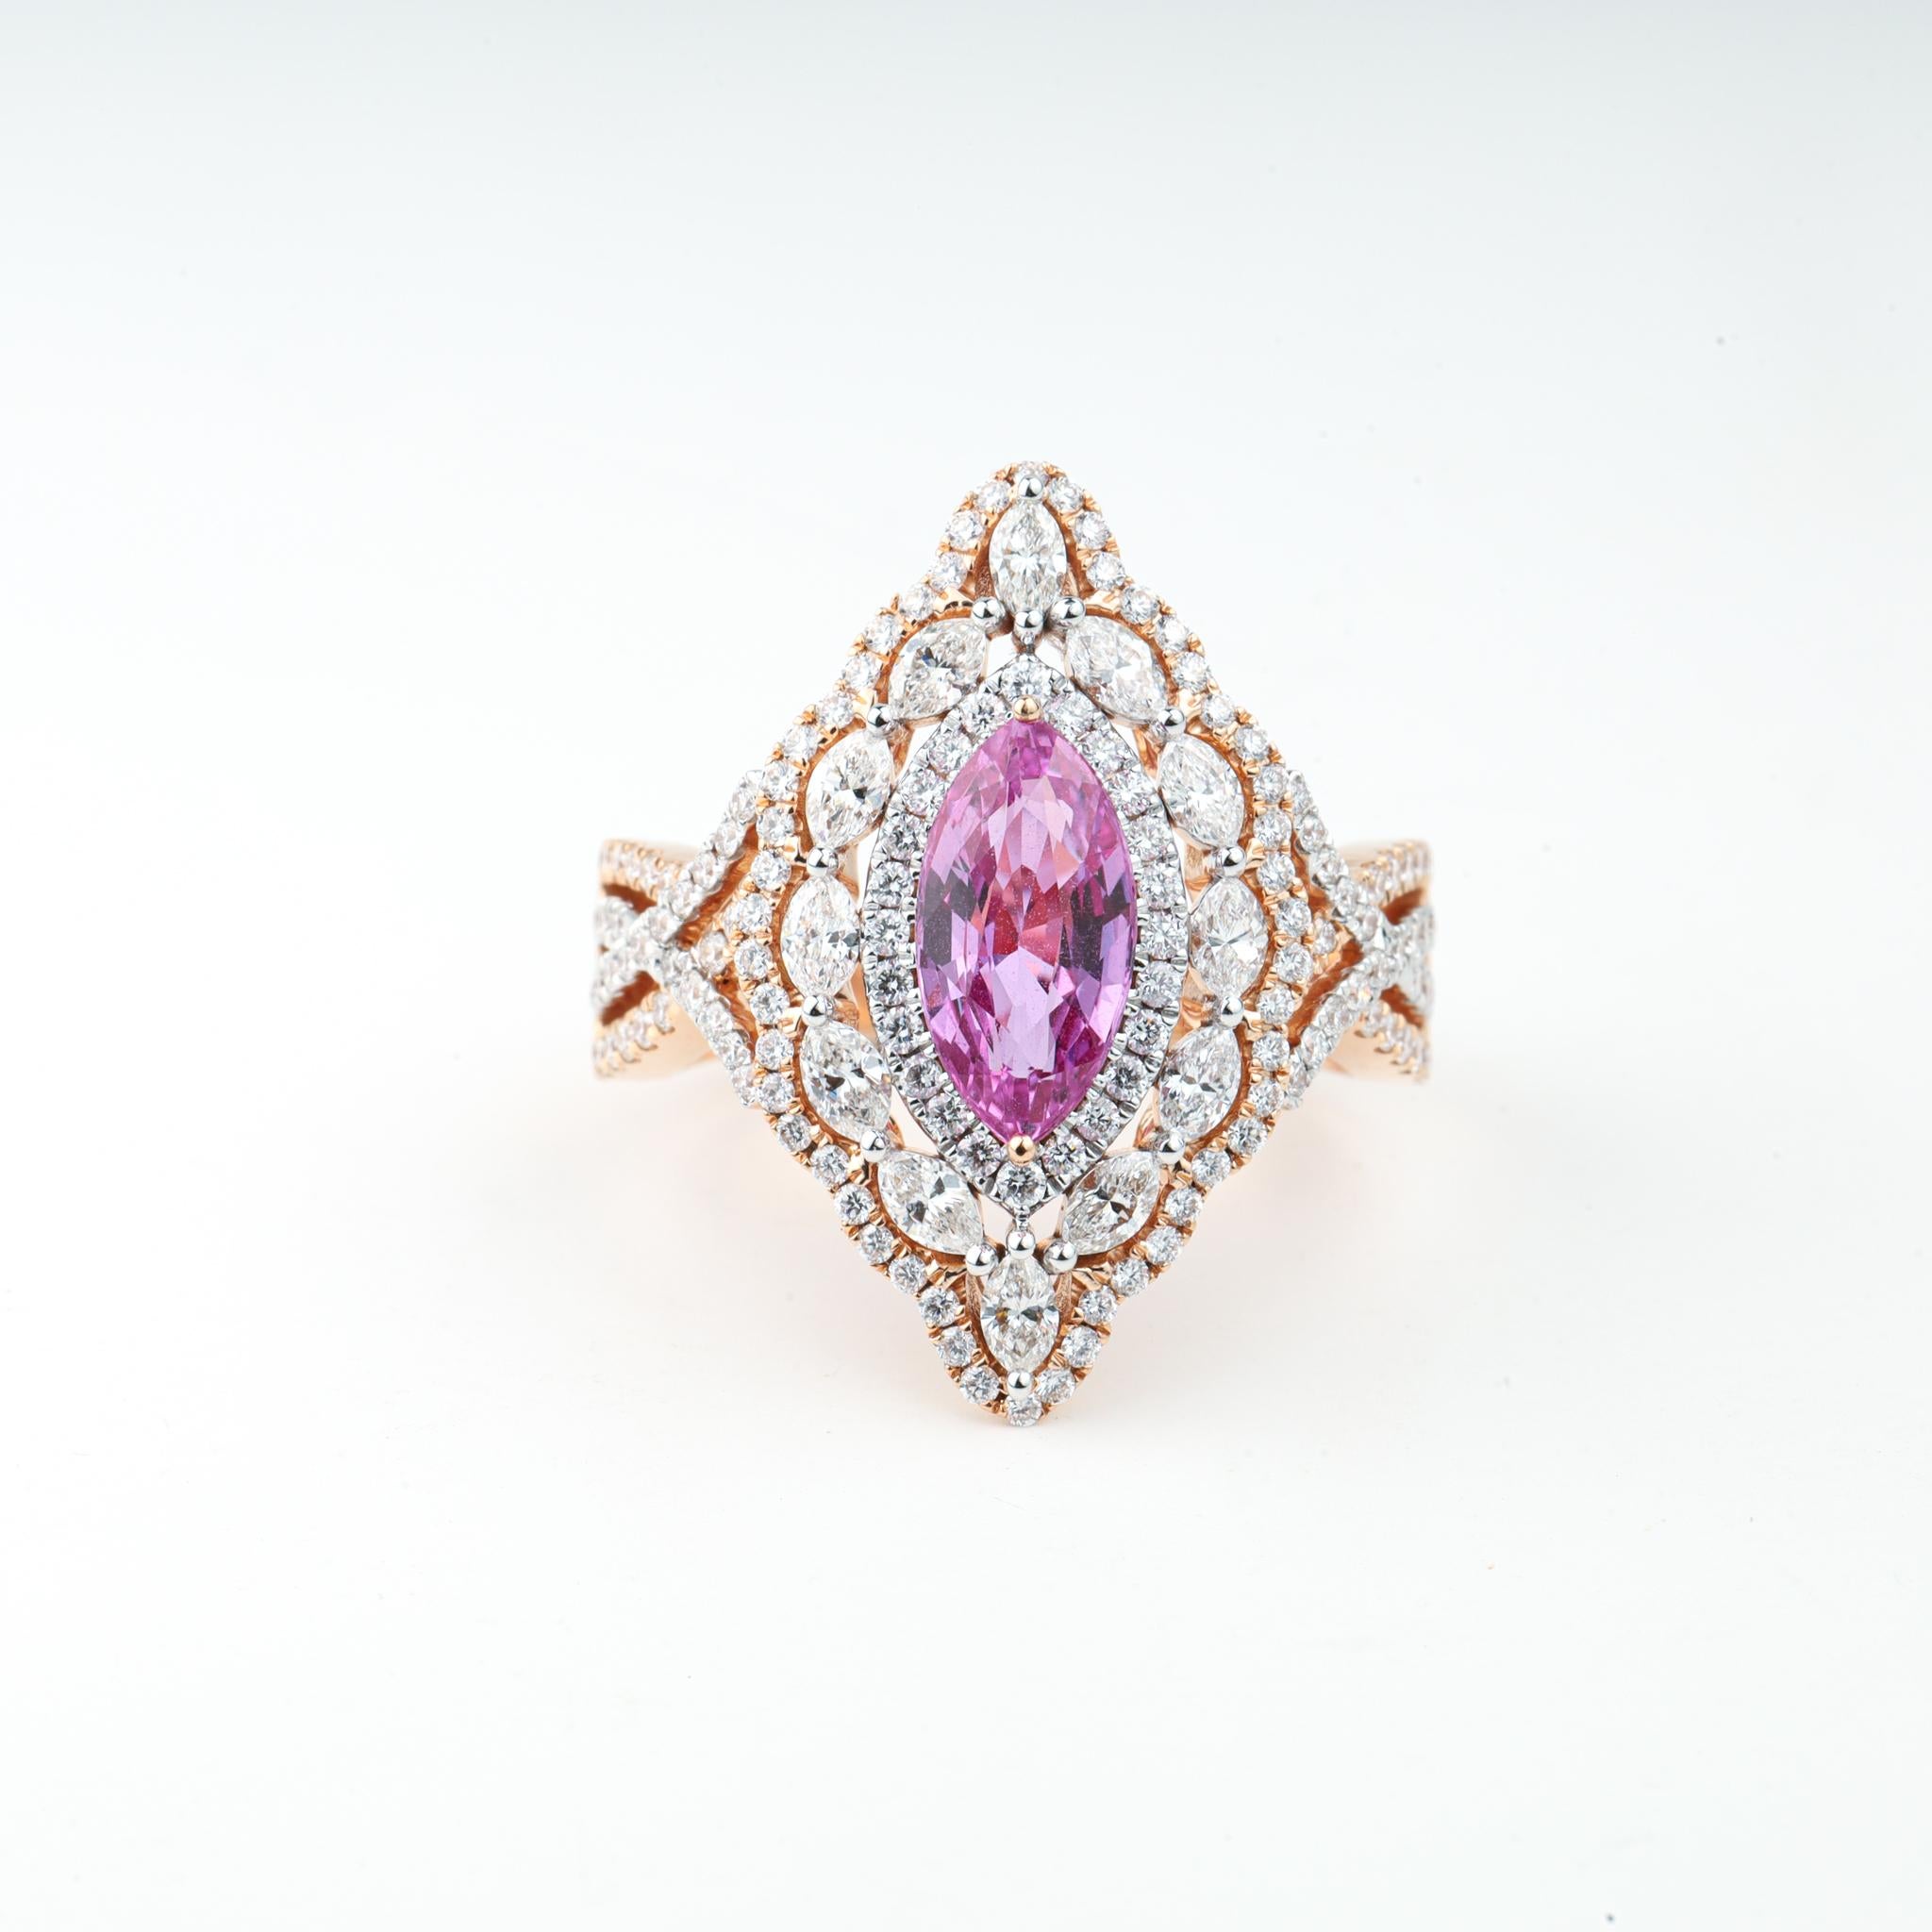 2 Carat Pink Sapphire Diamond Cocktail Engagement Ring in 18k Yellow Gold For Sale 3